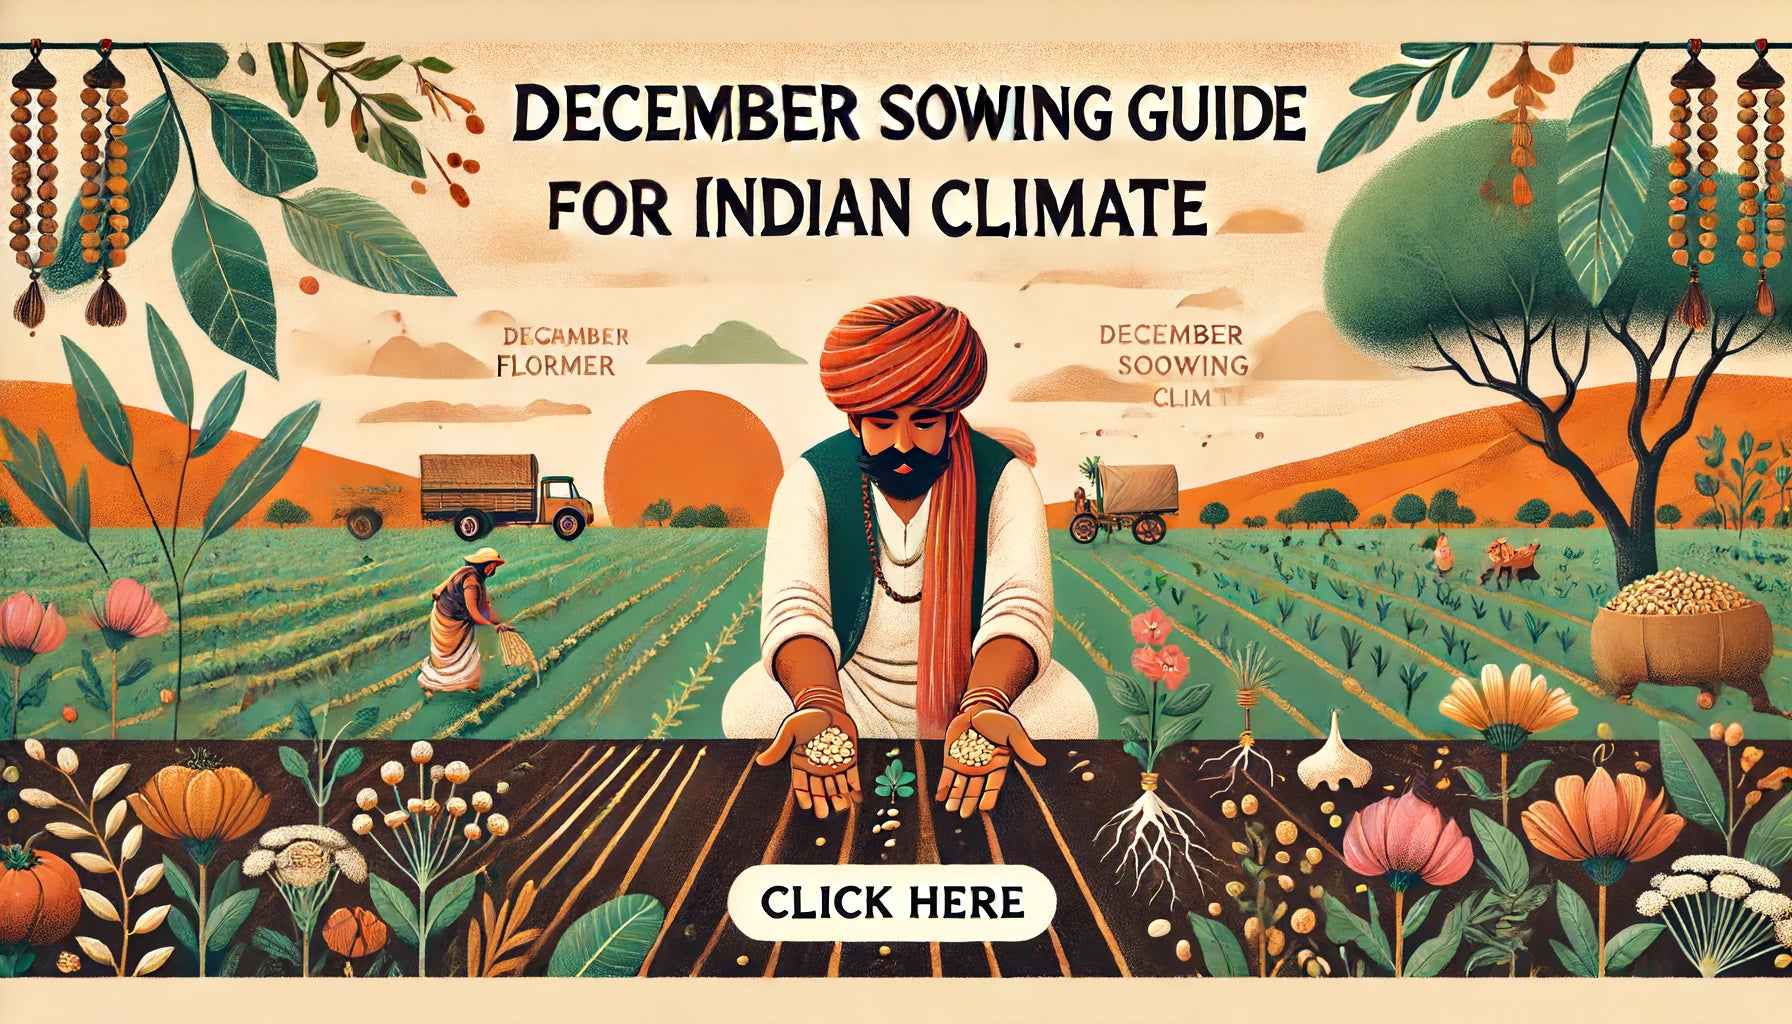 December Sowing Guide for Vegetables, Flowers, and Exotic Herbs in Indian Climate